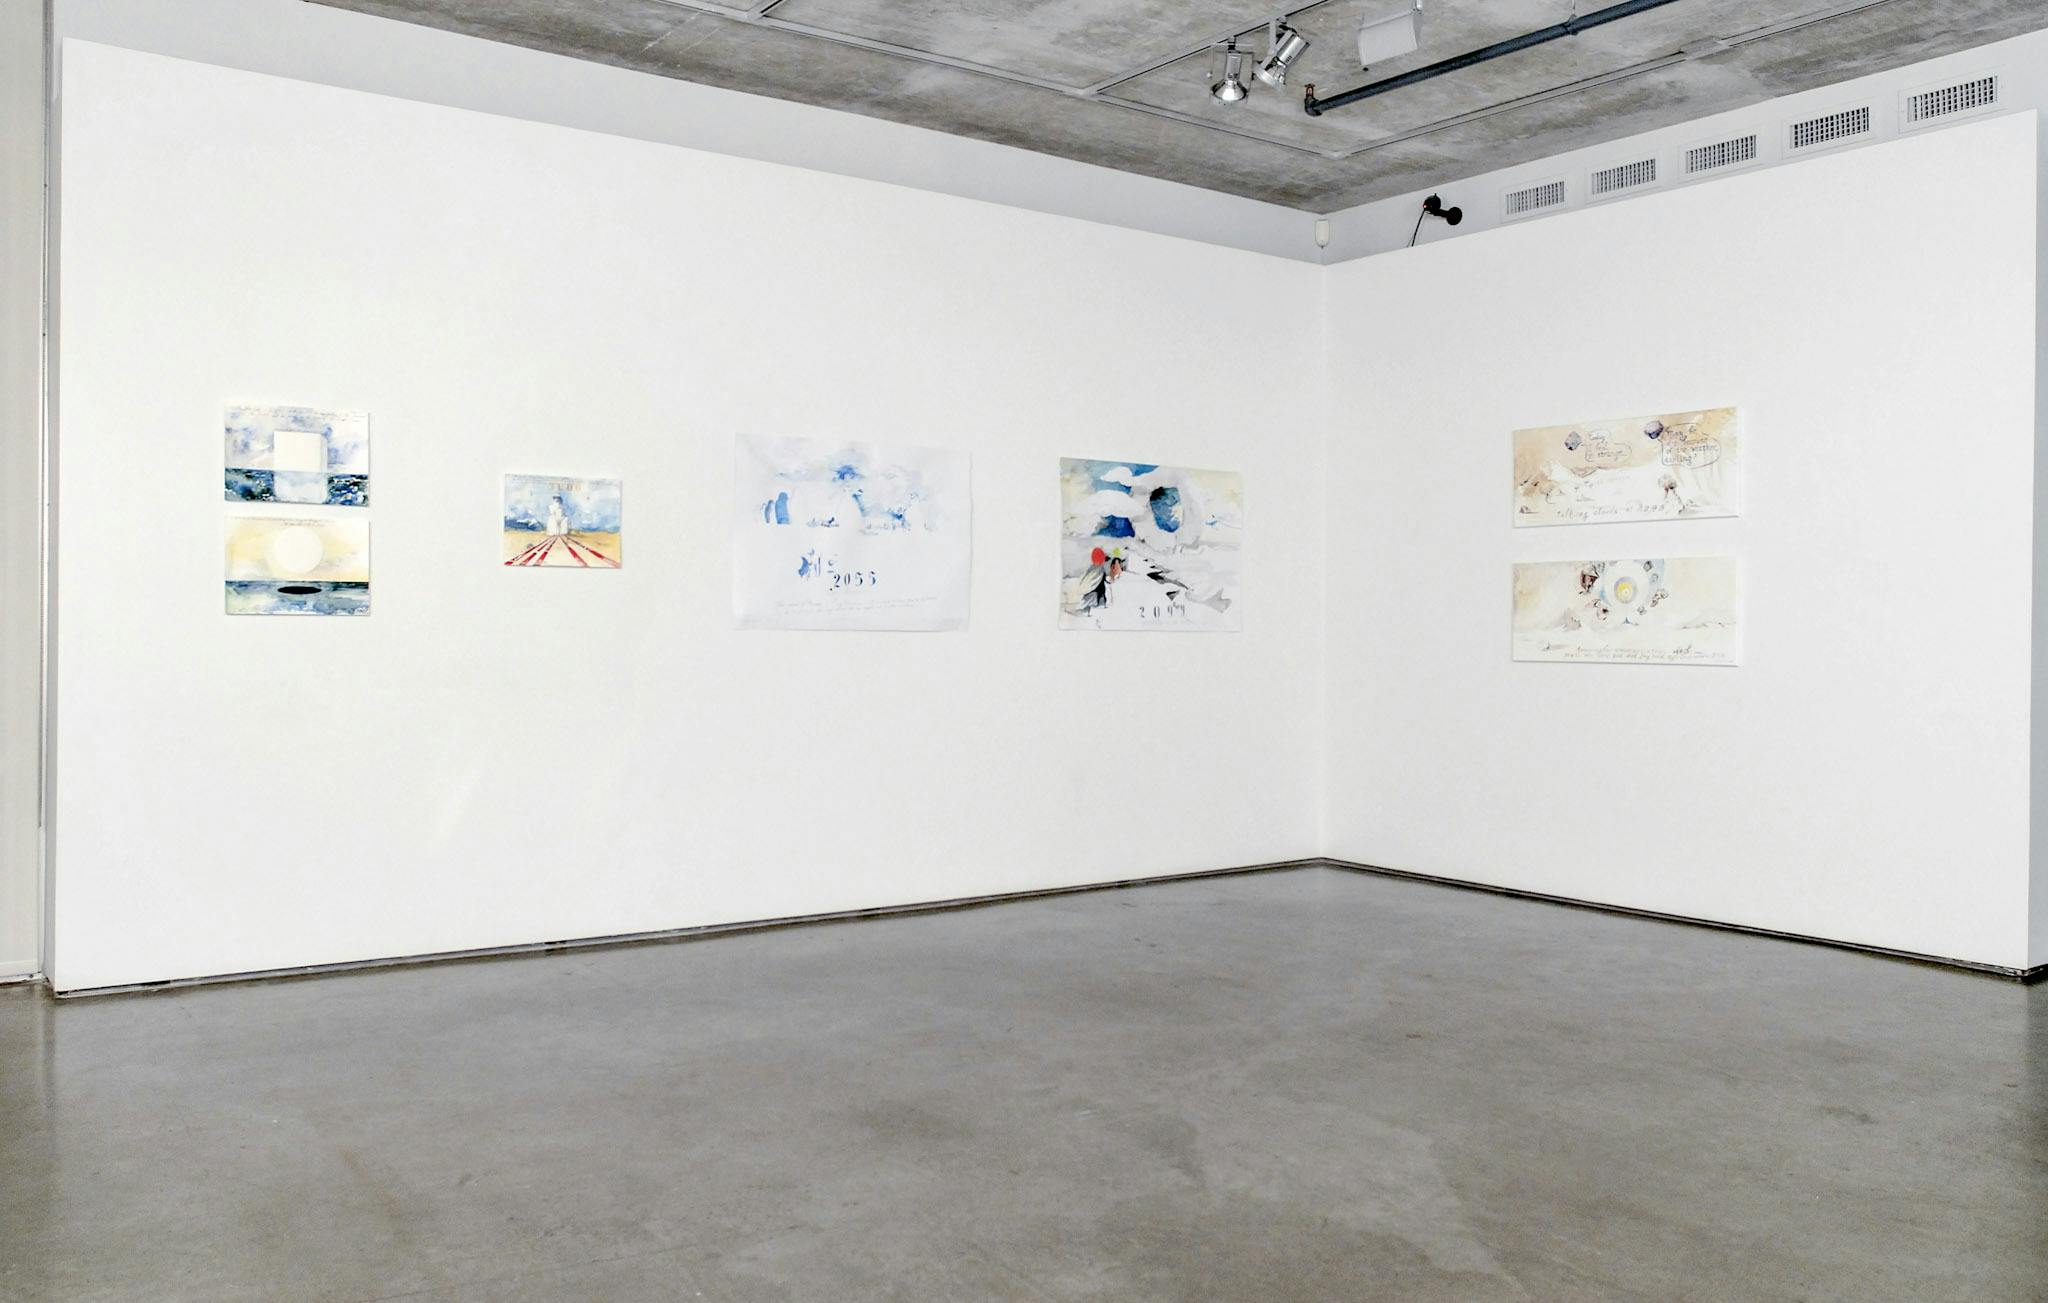 Six unframed coloured drawings are mounted on the gallery walls. They depict abstract images resembling various seascapes. Various red, blue, and sand colours are used in those drawings.